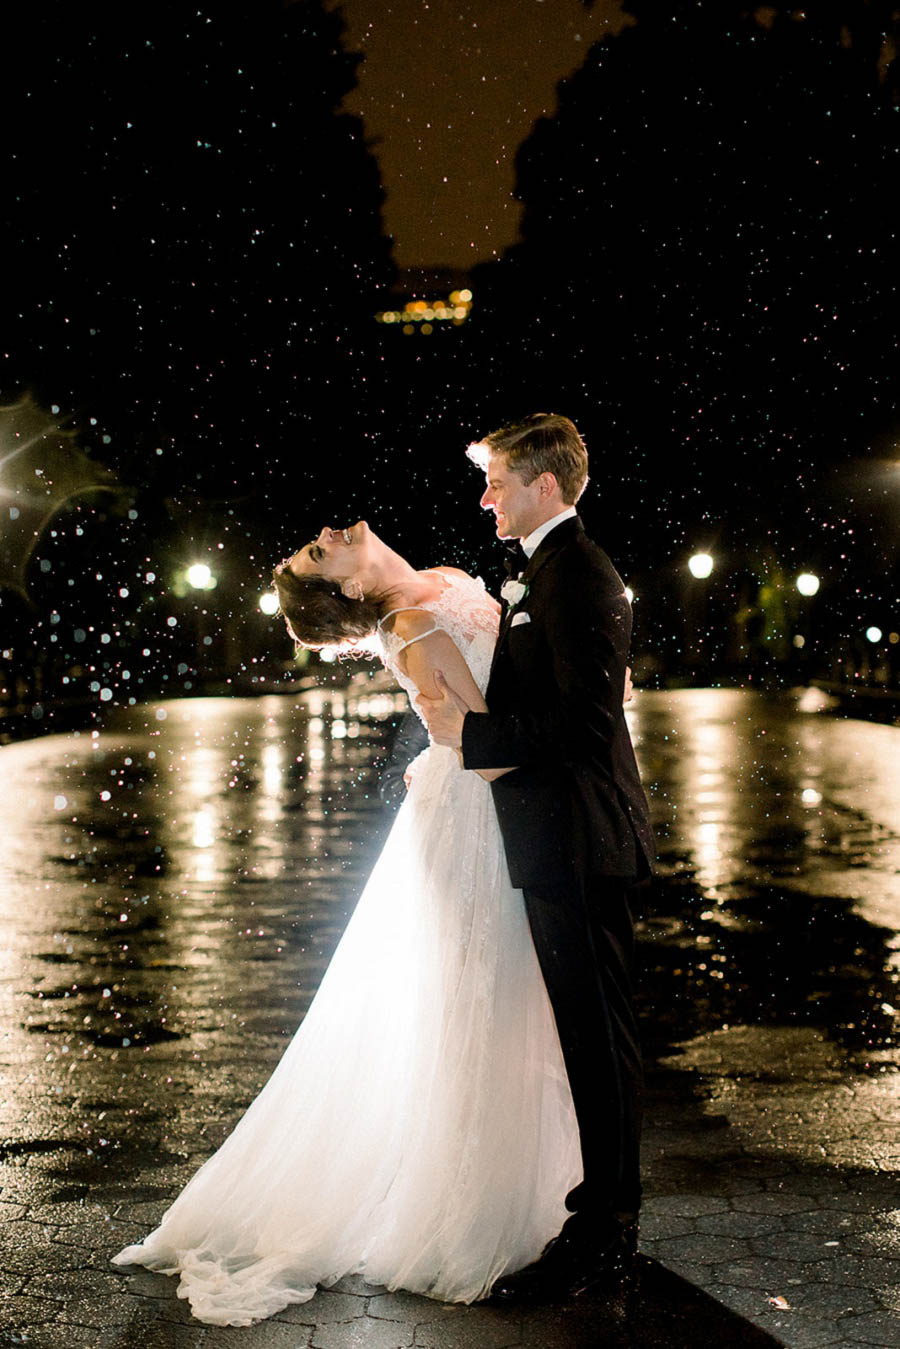 Central Park wedding photo at night in the rain captured by Amy Rizzuto Photography